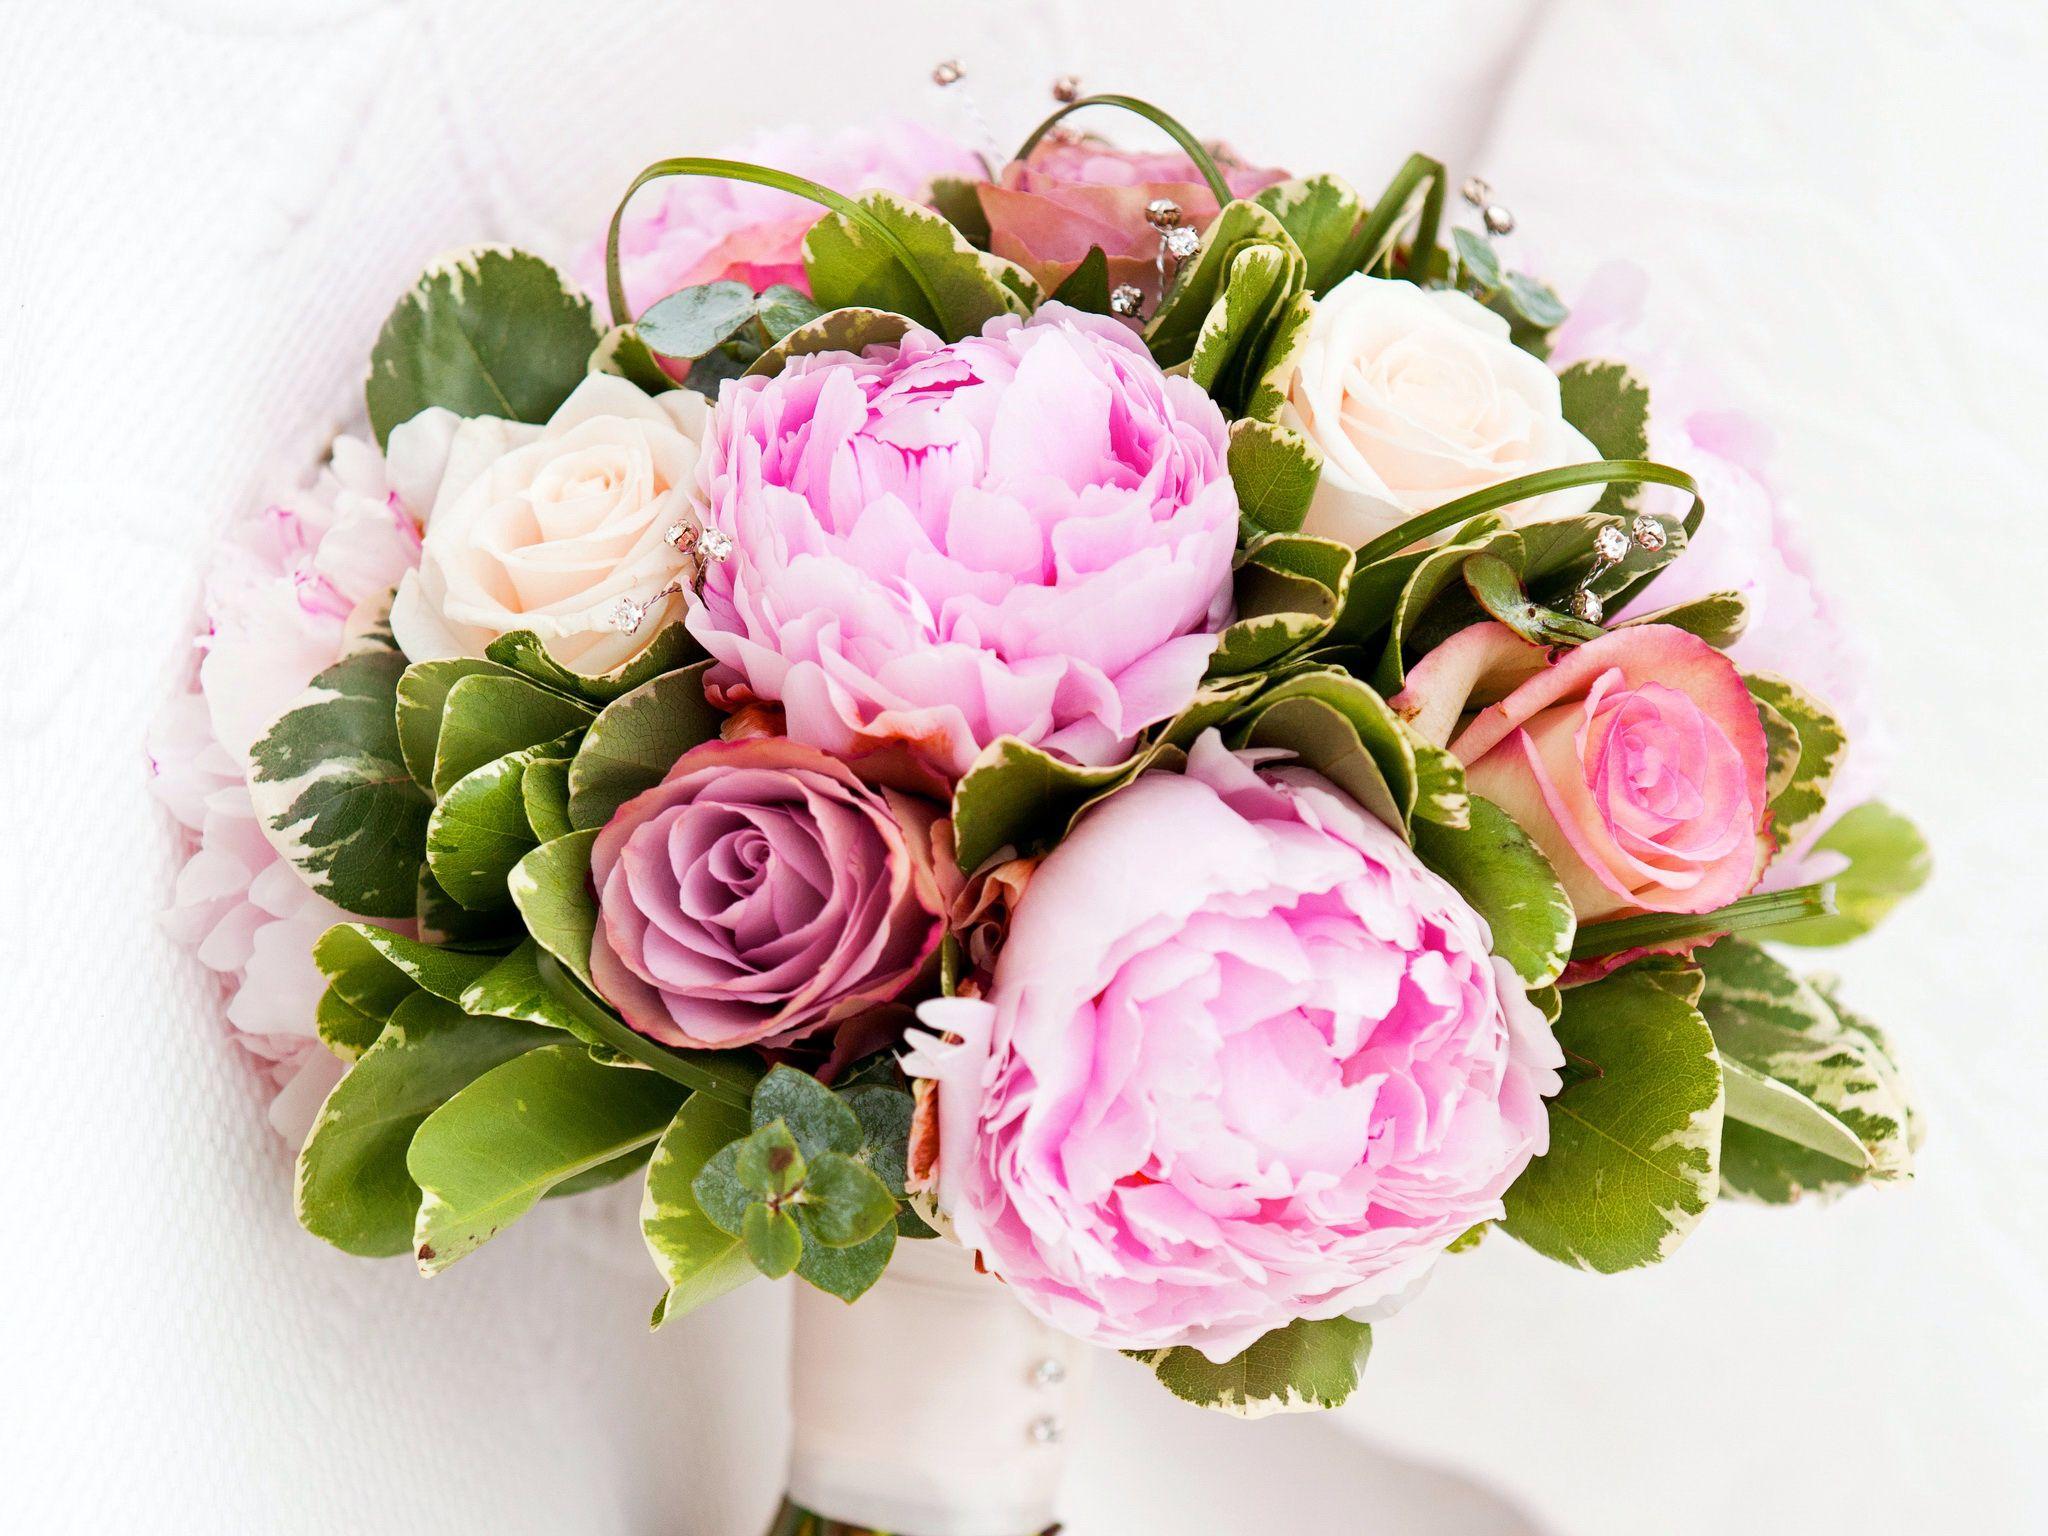 Peonies and Rose Bouquet